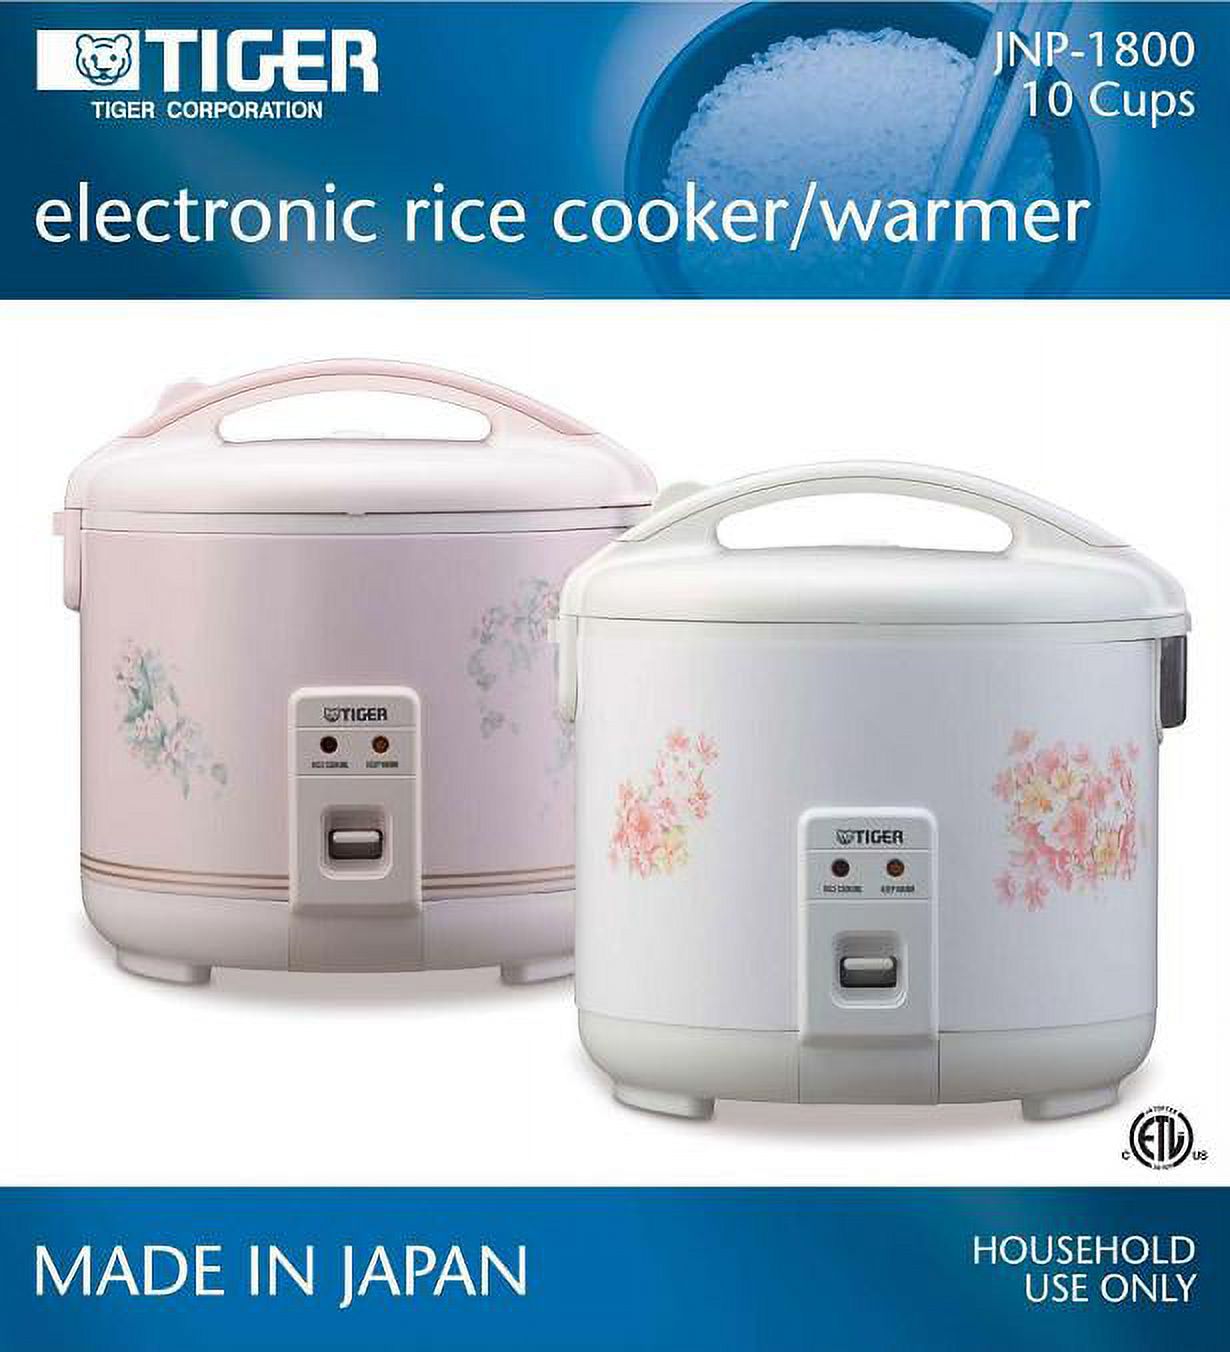 Tiger JNP-1800 10-Cup Floral White Rice Cooker  Warmer